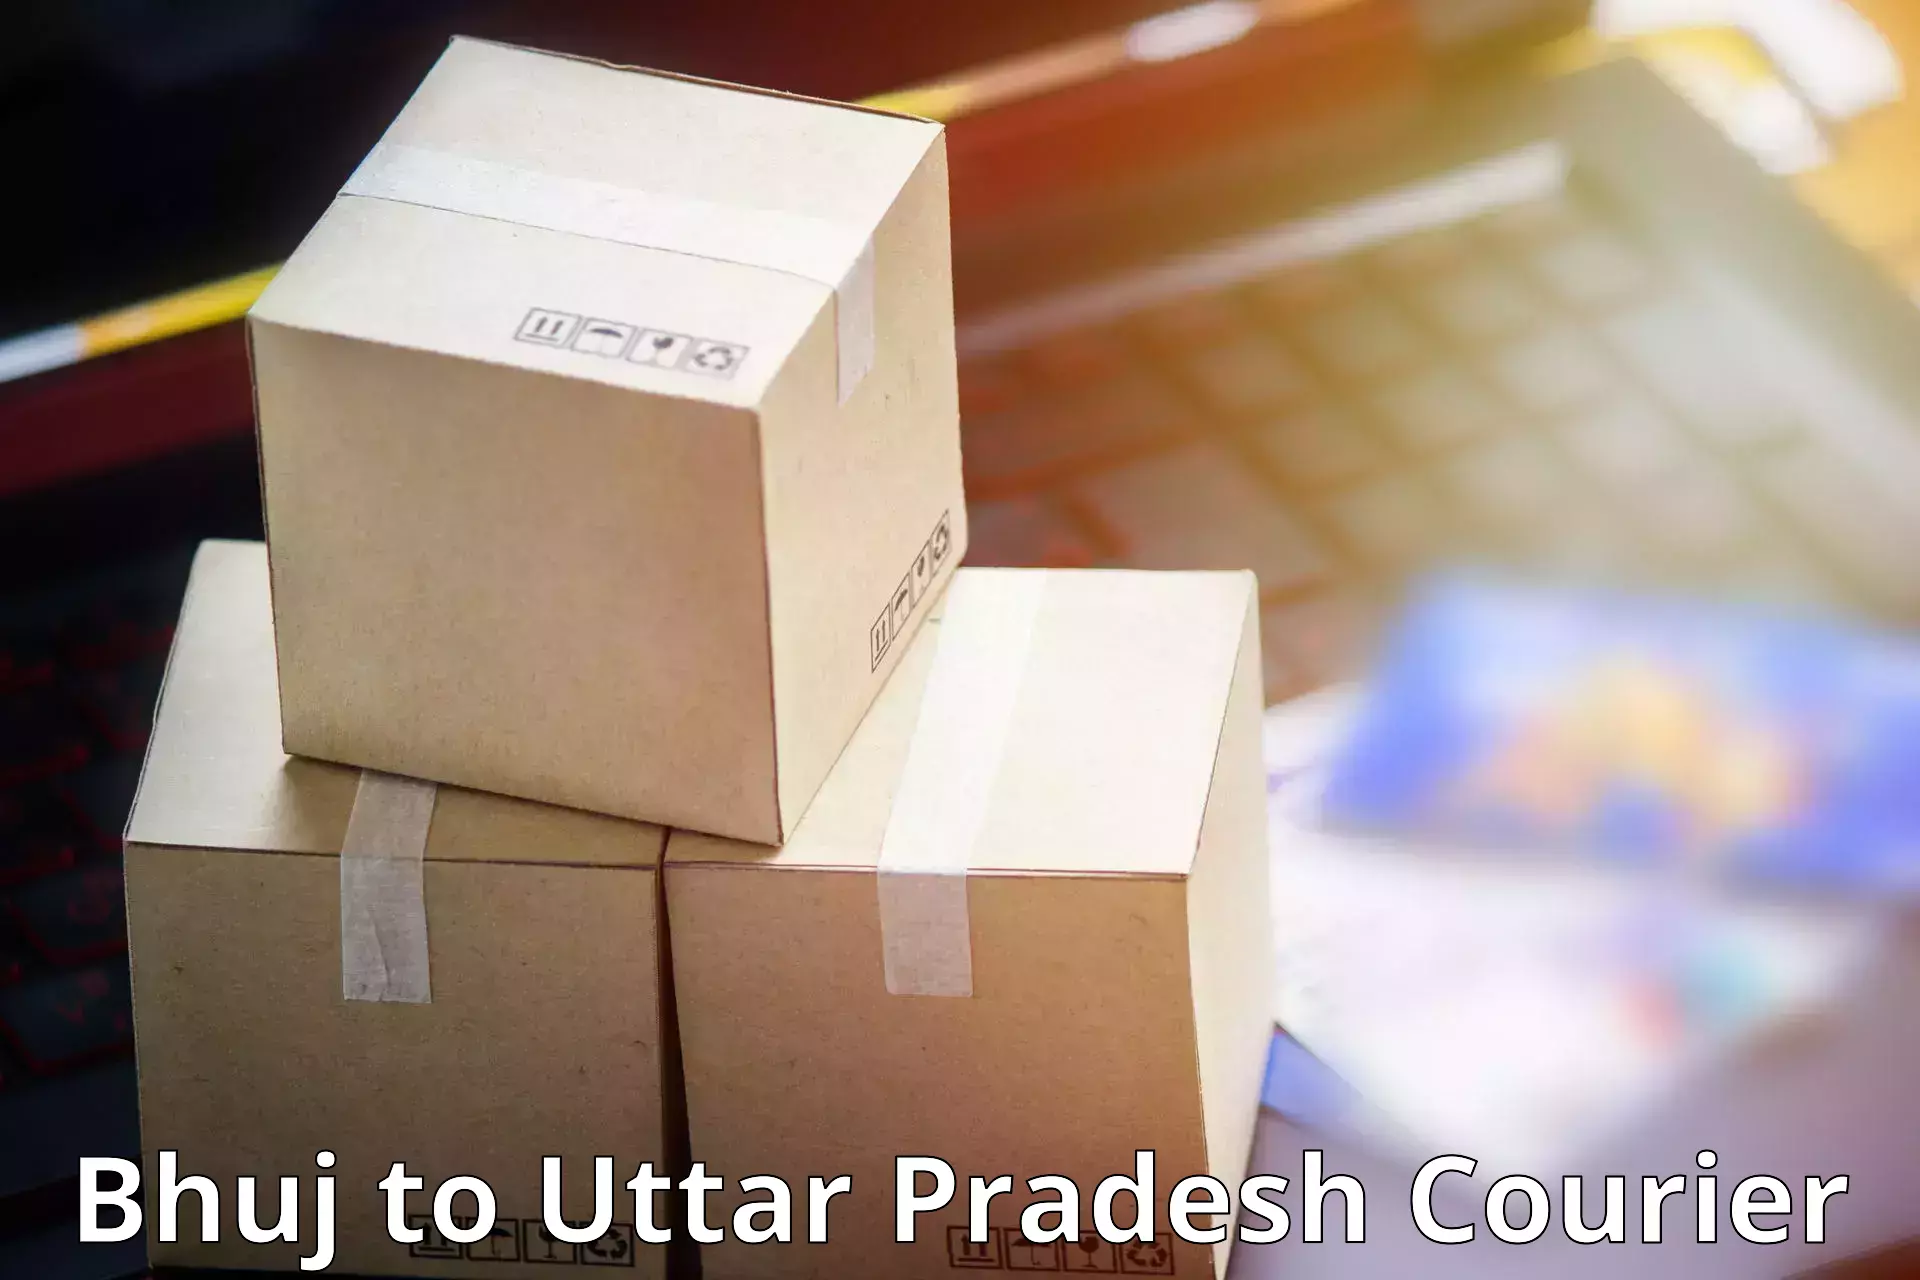 State-of-the-art courier technology Bhuj to Aliganj